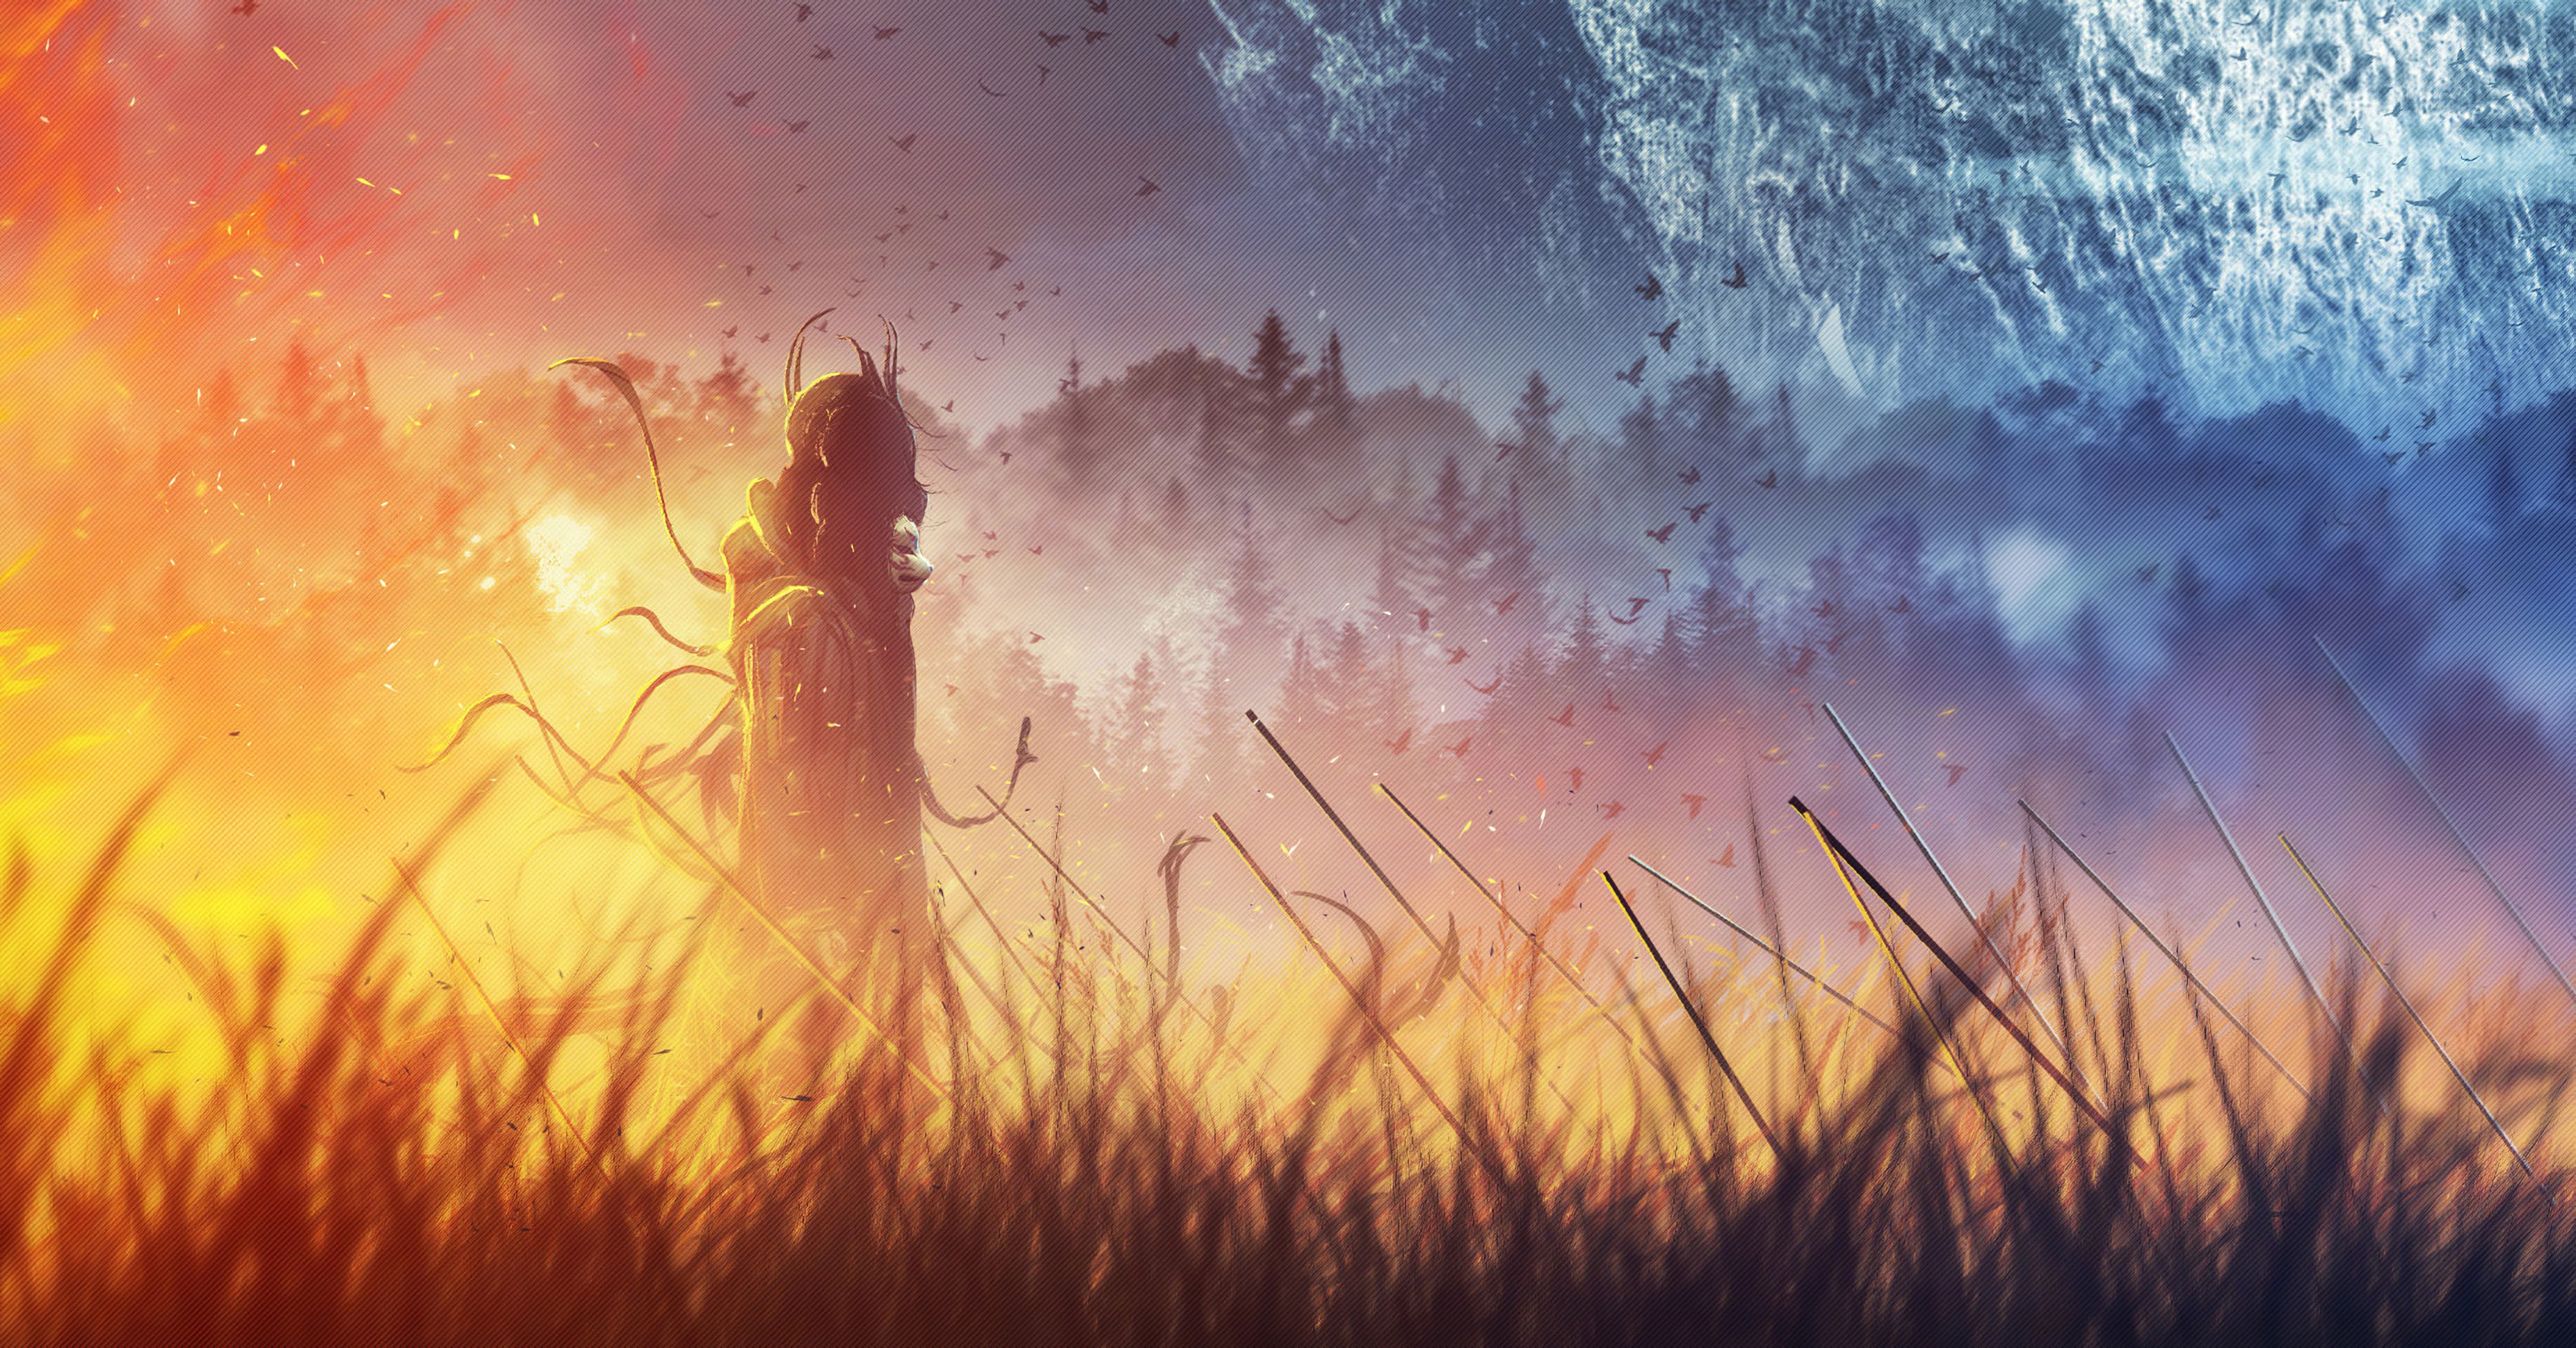 A woman with horns and wings stands in a field of tall grass - Samurai